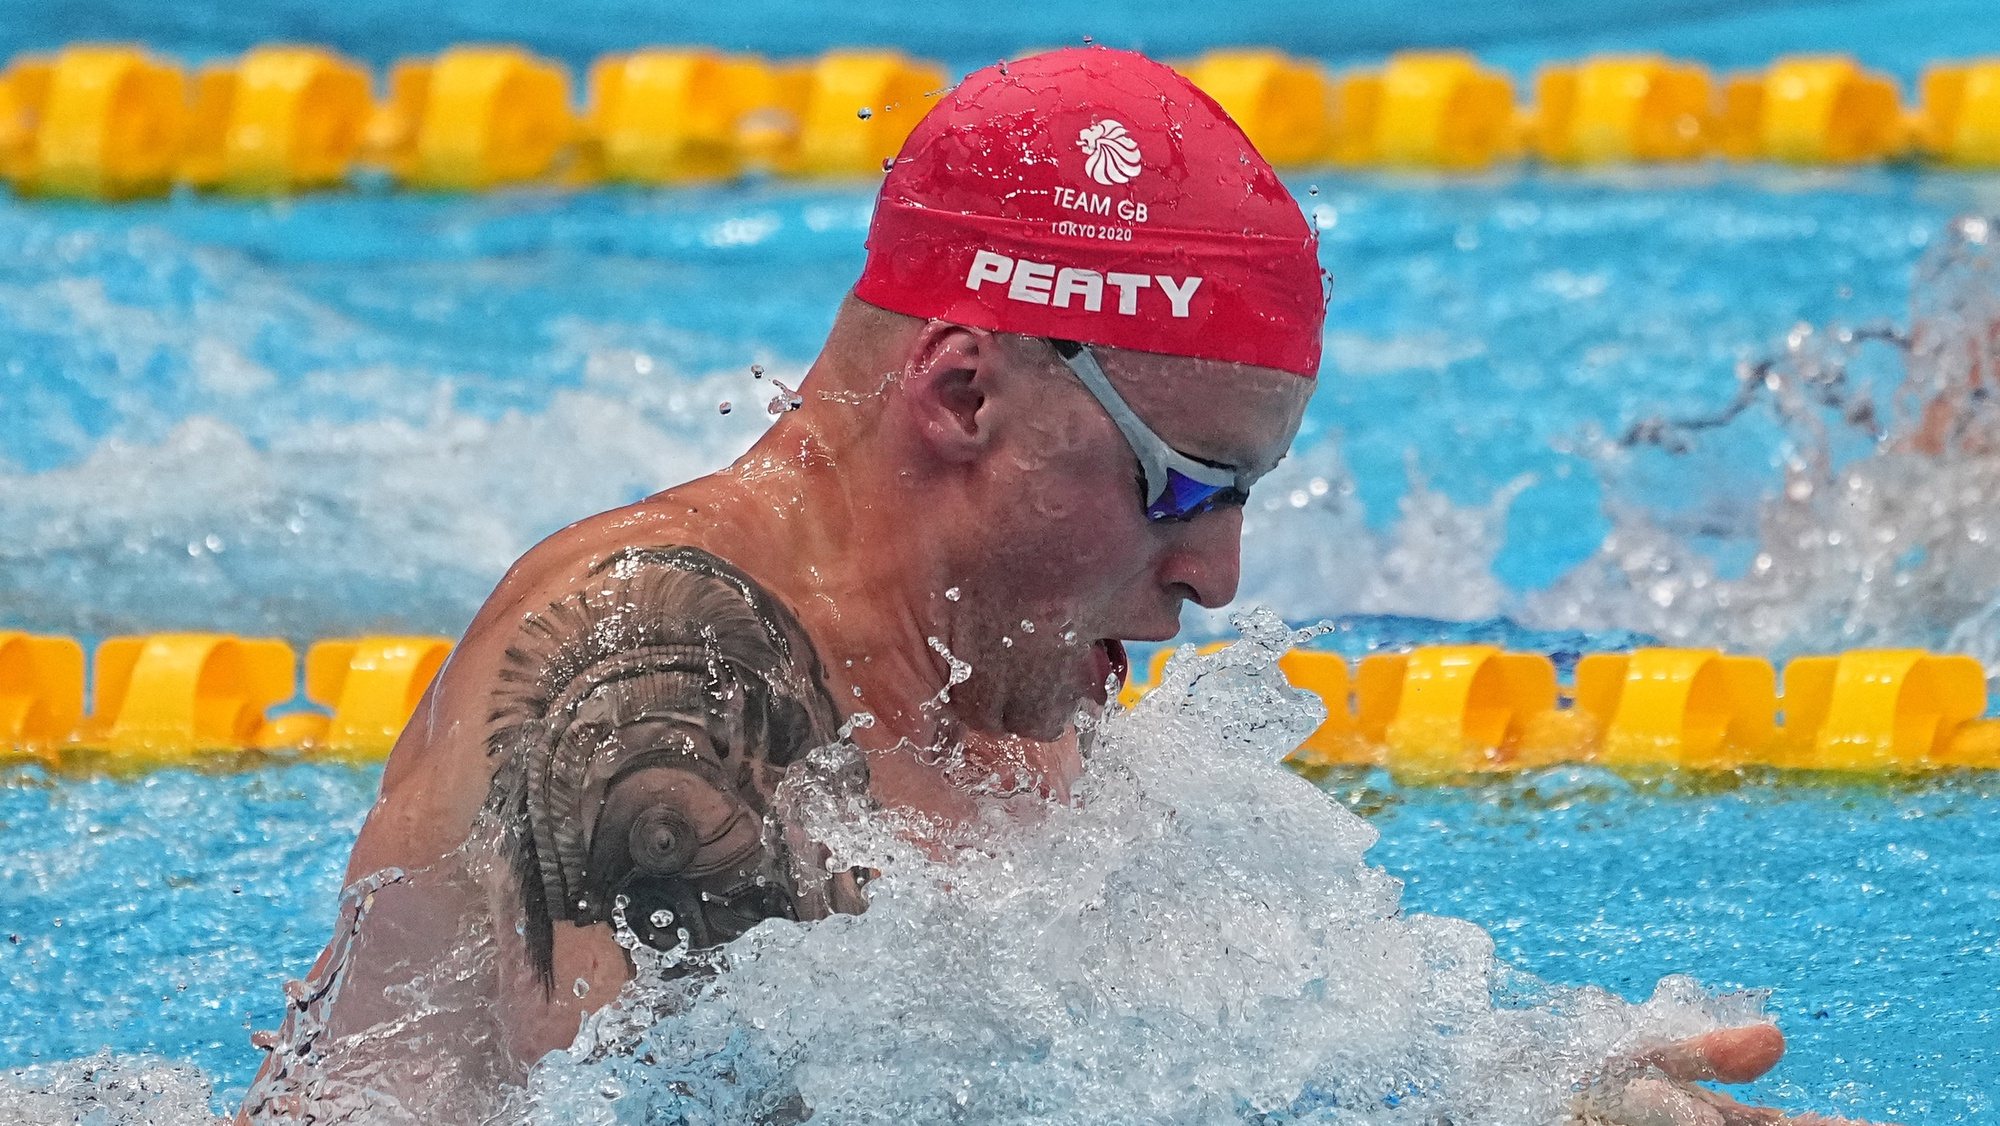 epa09376761 Adam Peaty of Great Britain competes in the Mixed 4 x 100m Medley Relay heats during the Swimming events of the Tokyo 2020 Olympic Games at the Tokyo Aquatics Centre in Tokyo, Japan, 29 July 2021.  EPA/NIC BOTHMA